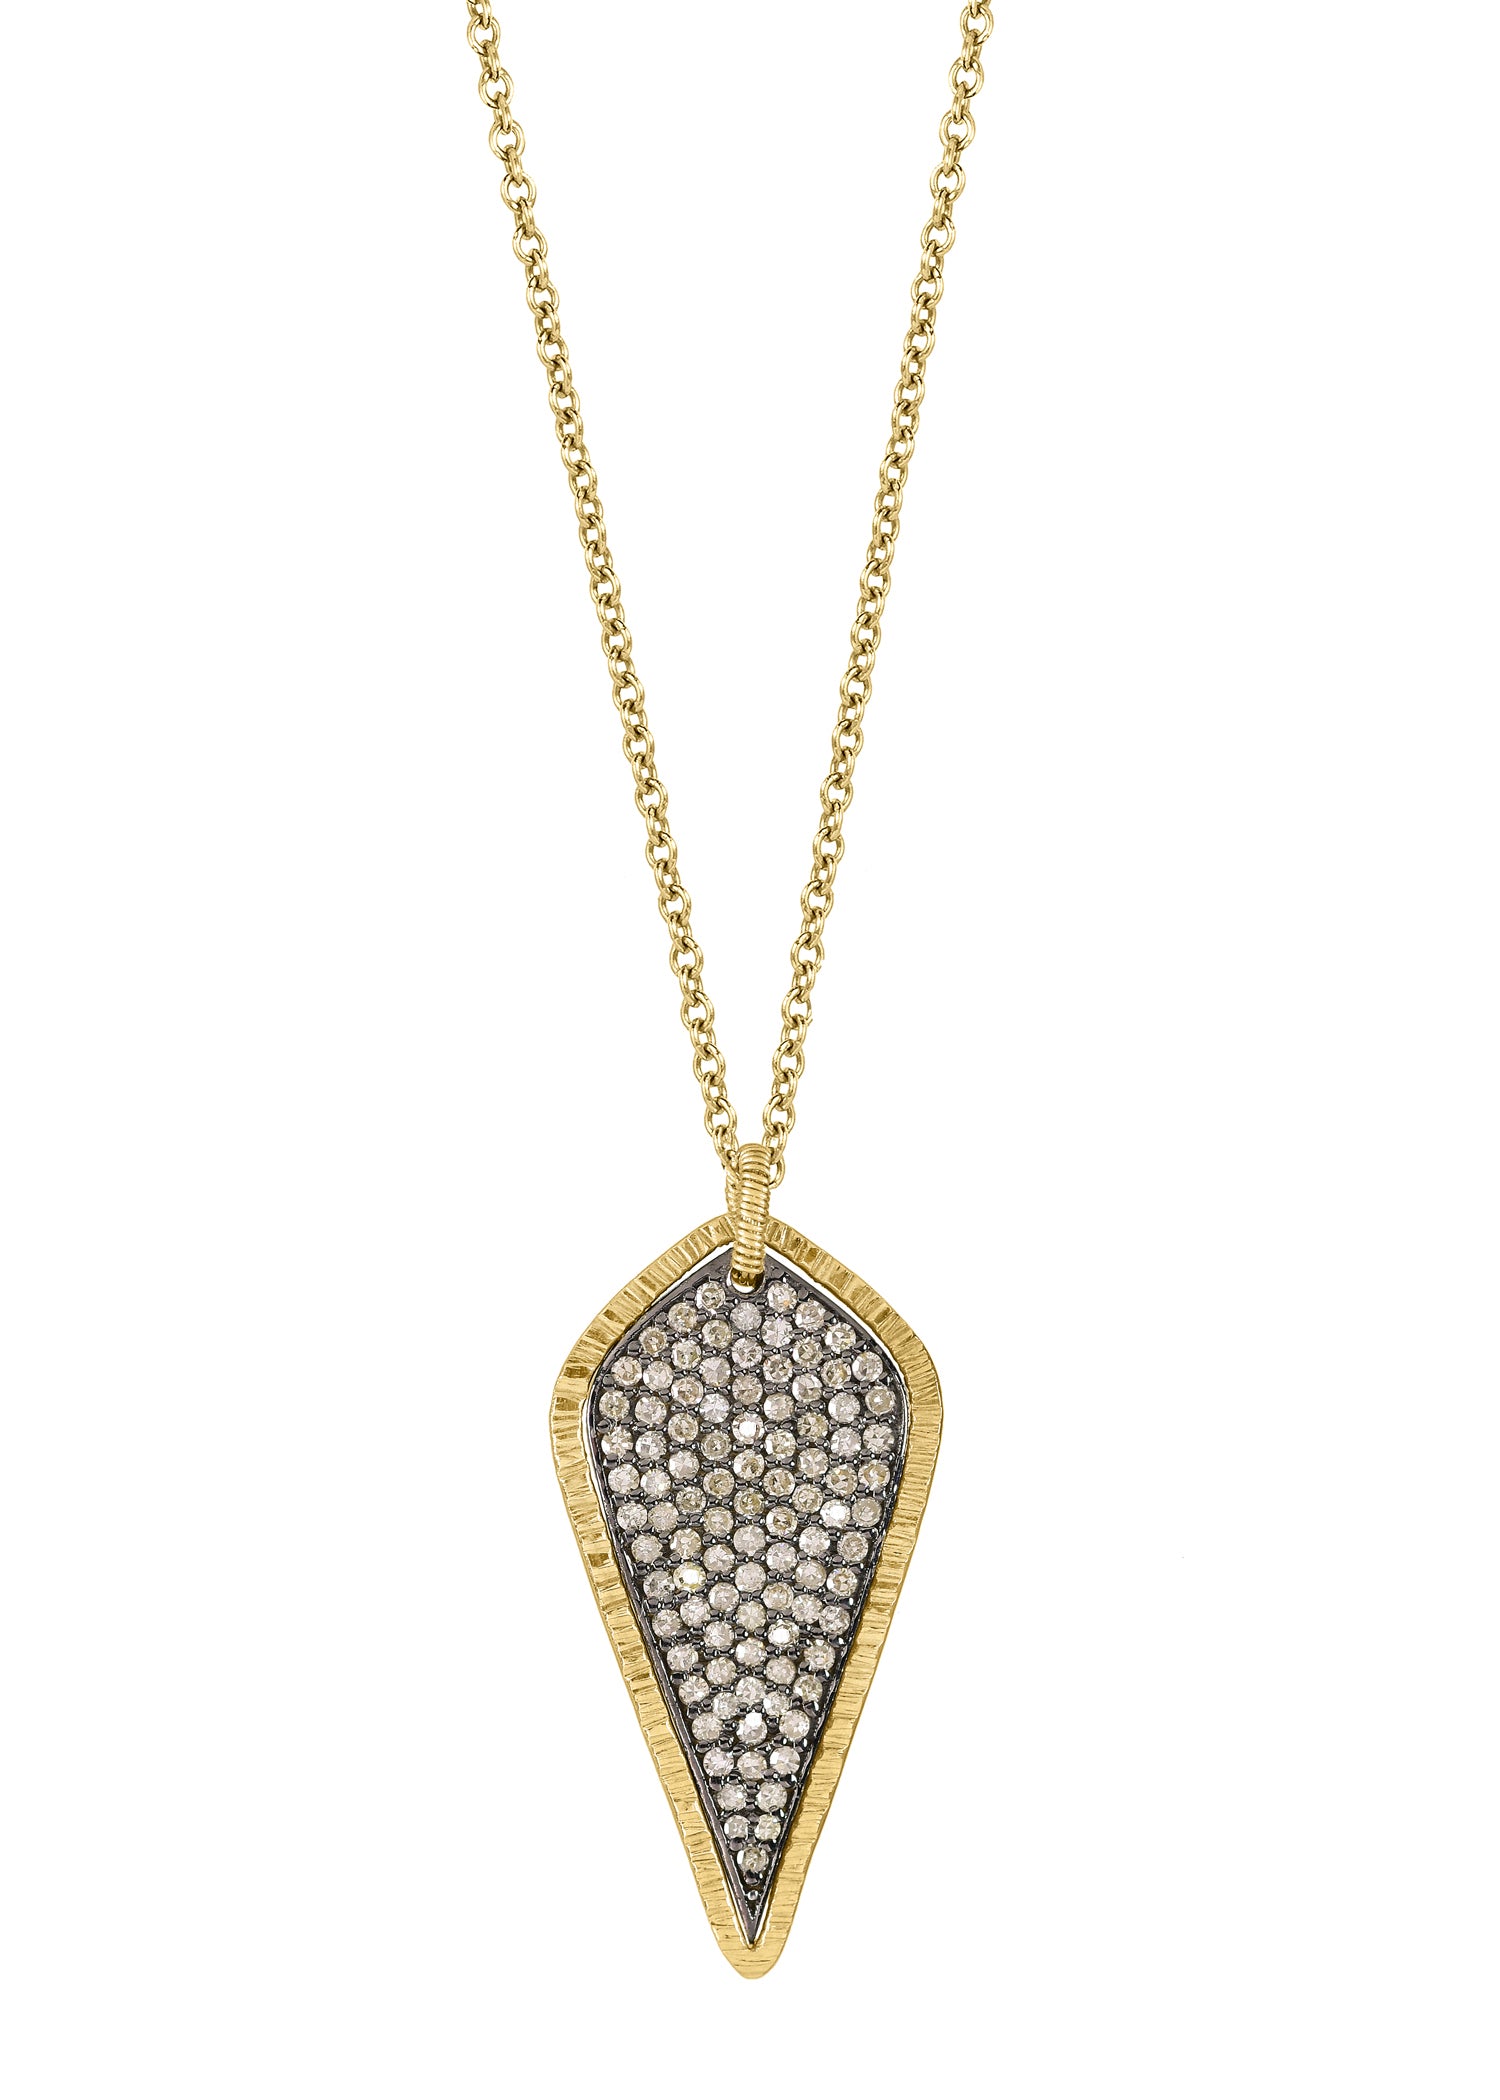 Diamond 14k gold Sterling silver Mixed metal Special order only Necklace measures 17" in length Pendant measures 1-1/16" in length and 9/16" in width at the widest point Handmade in our Los Angeles studio